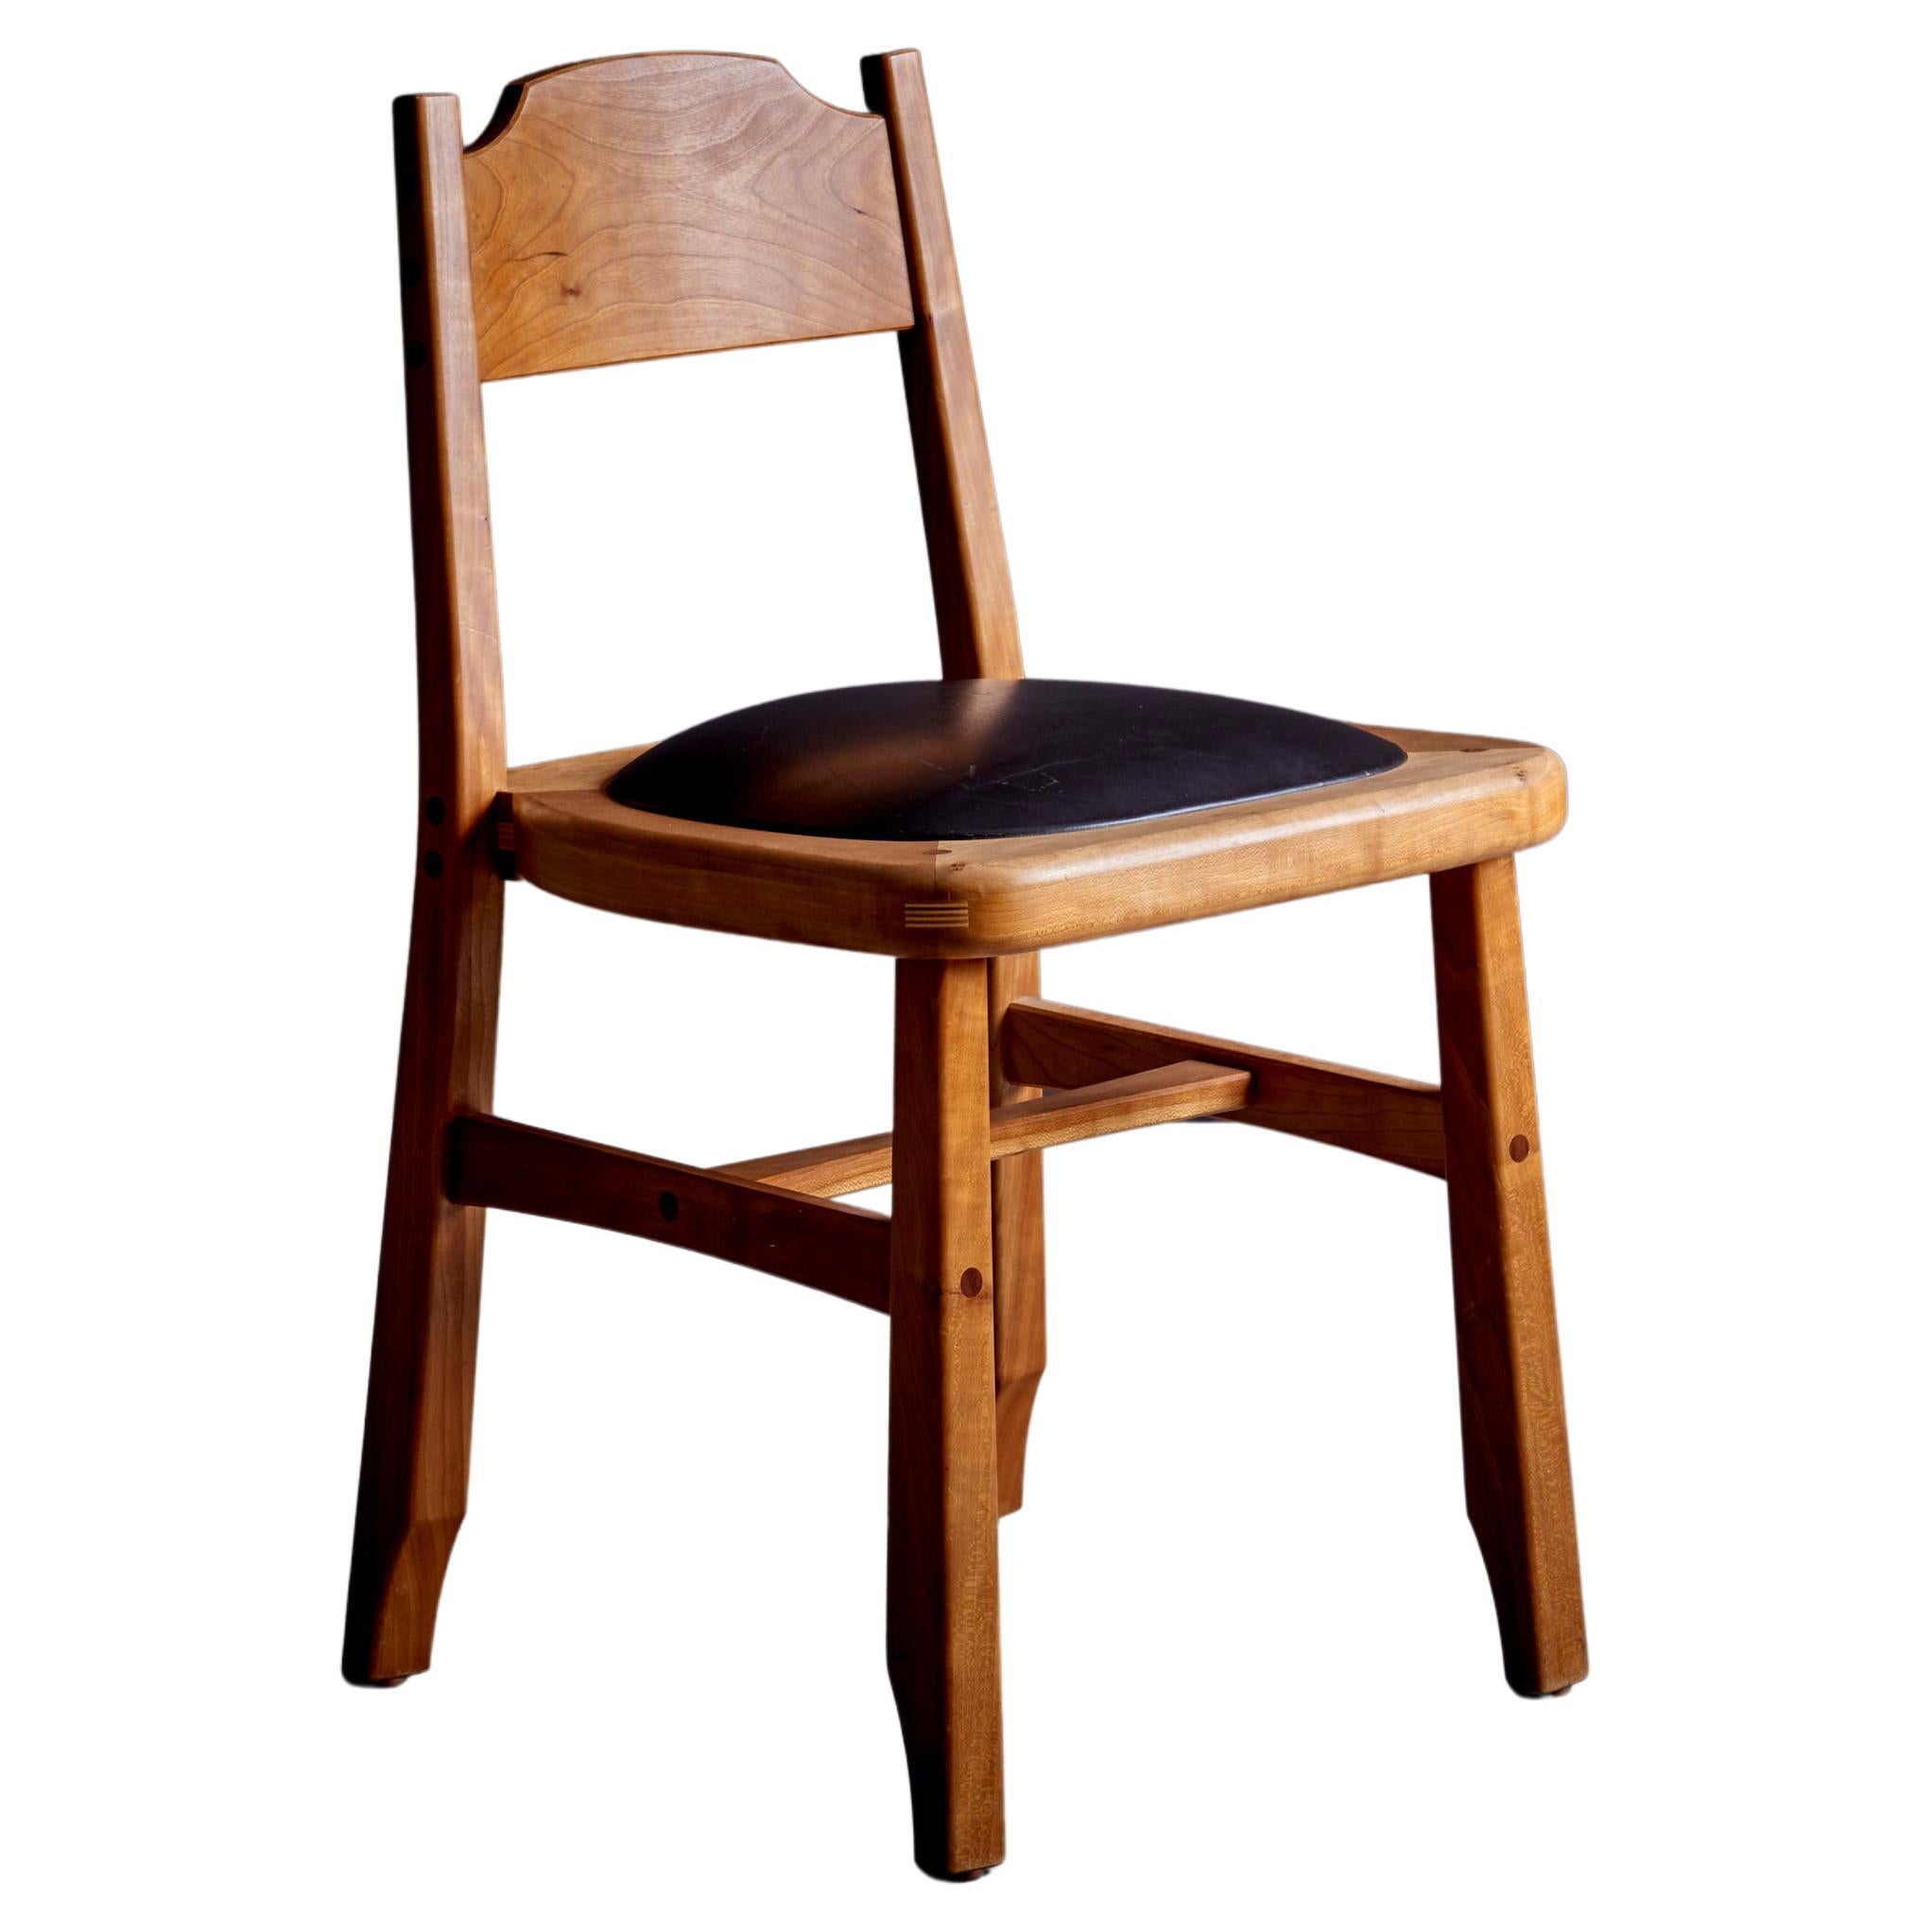 Signed Studio Chair by American Woodcraftsman Mike Bartell, 1993 For Sale